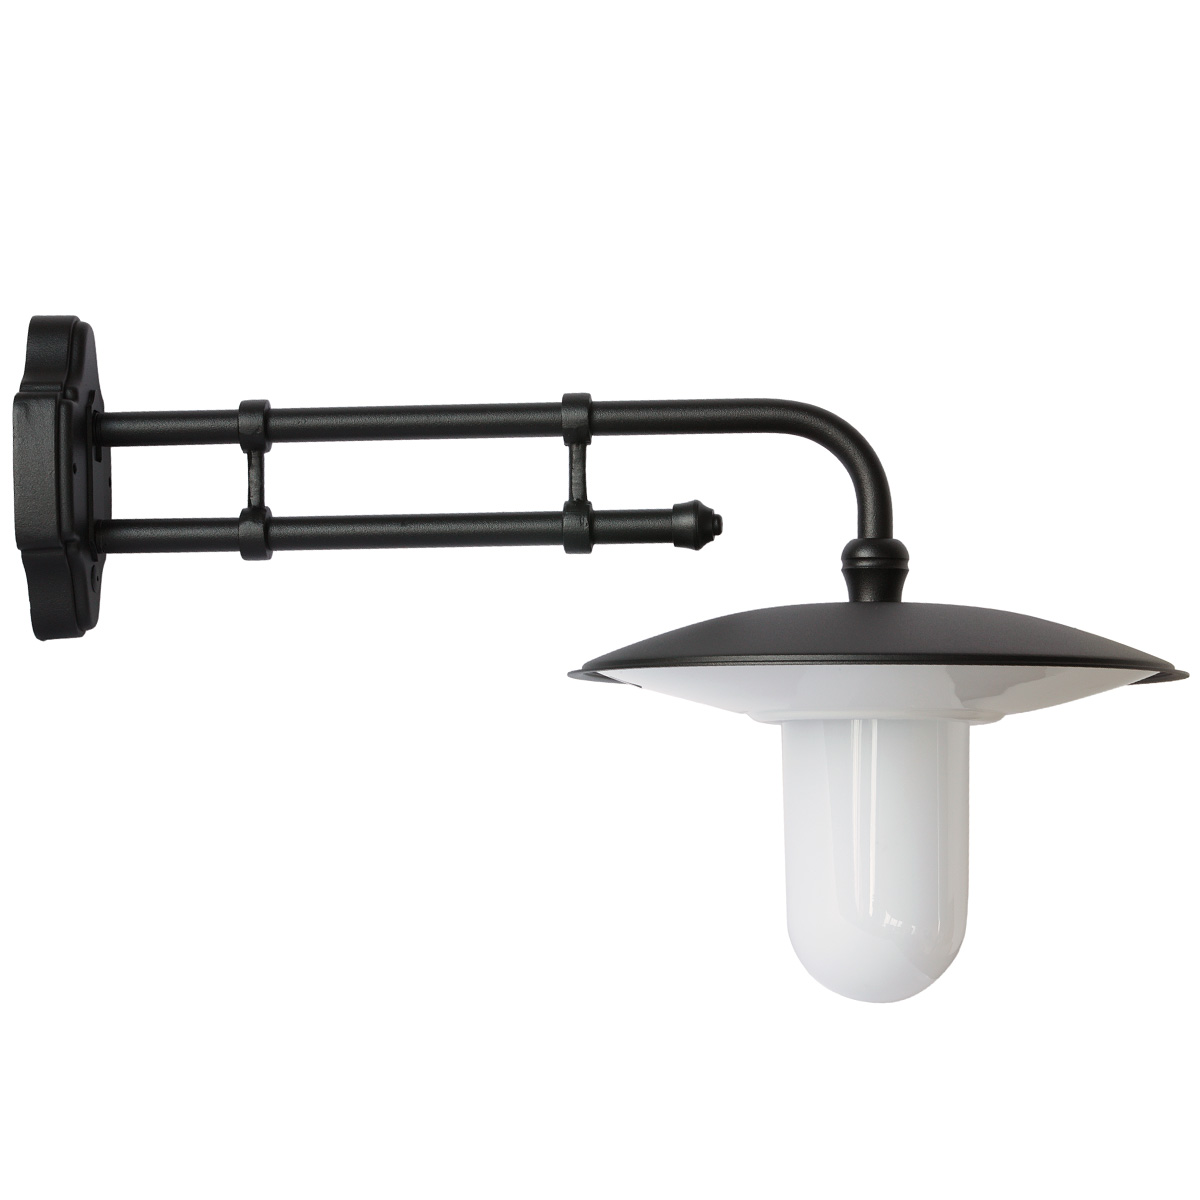 Wall Light for Outdoors with Double-Mast Bracket